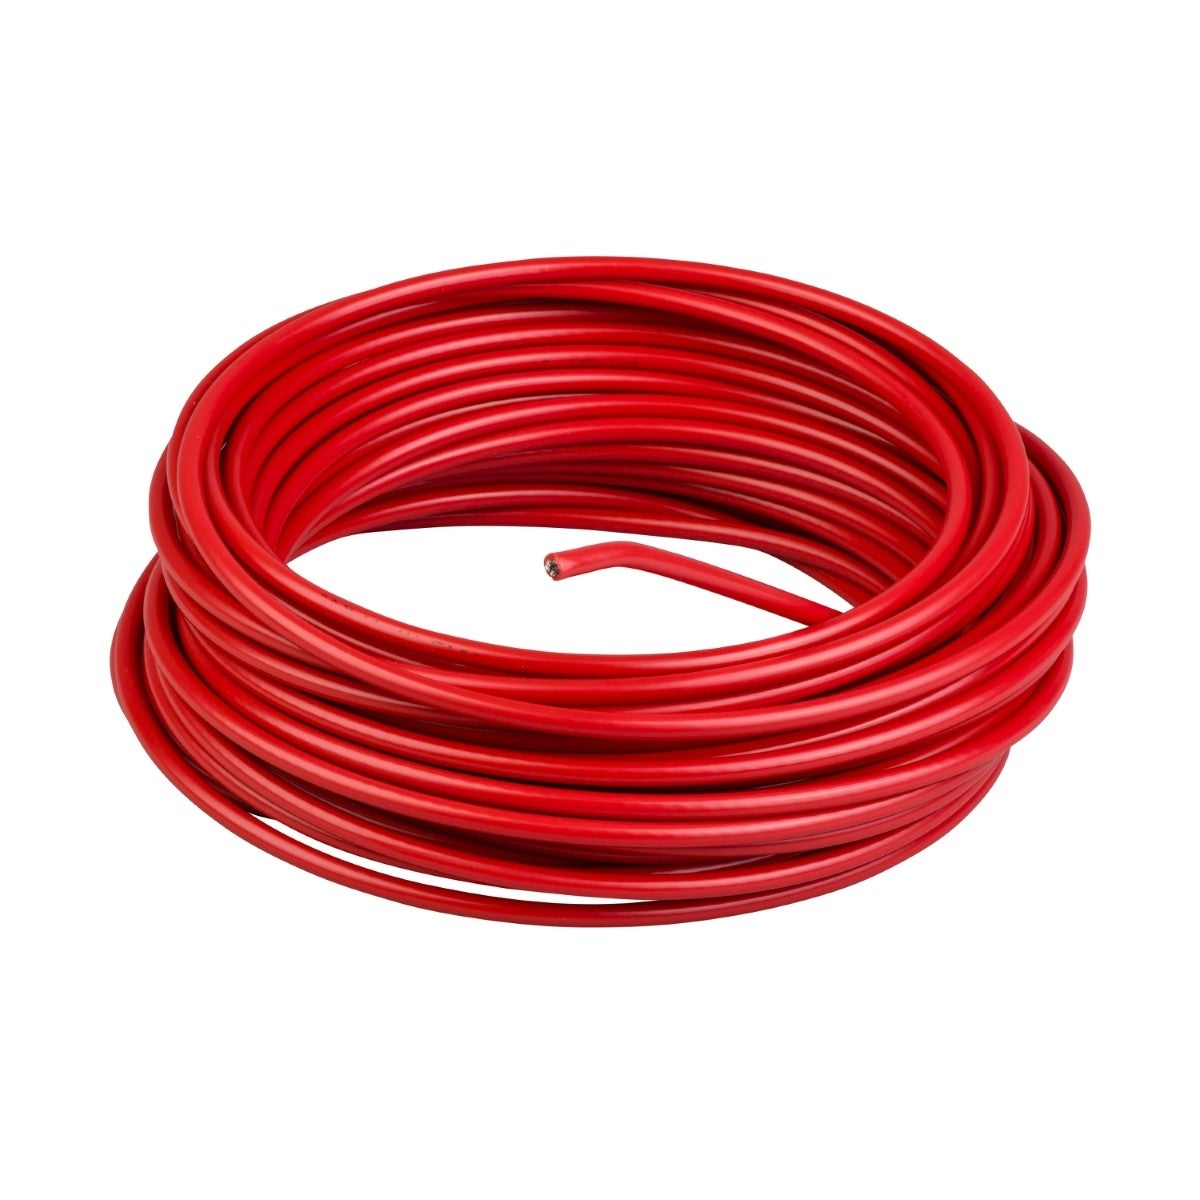 Telemecanique Emergency stop rope pull switches XY2C, red galvanised cable, Ø 3.2 mm, L 50.5 m, for XY2C